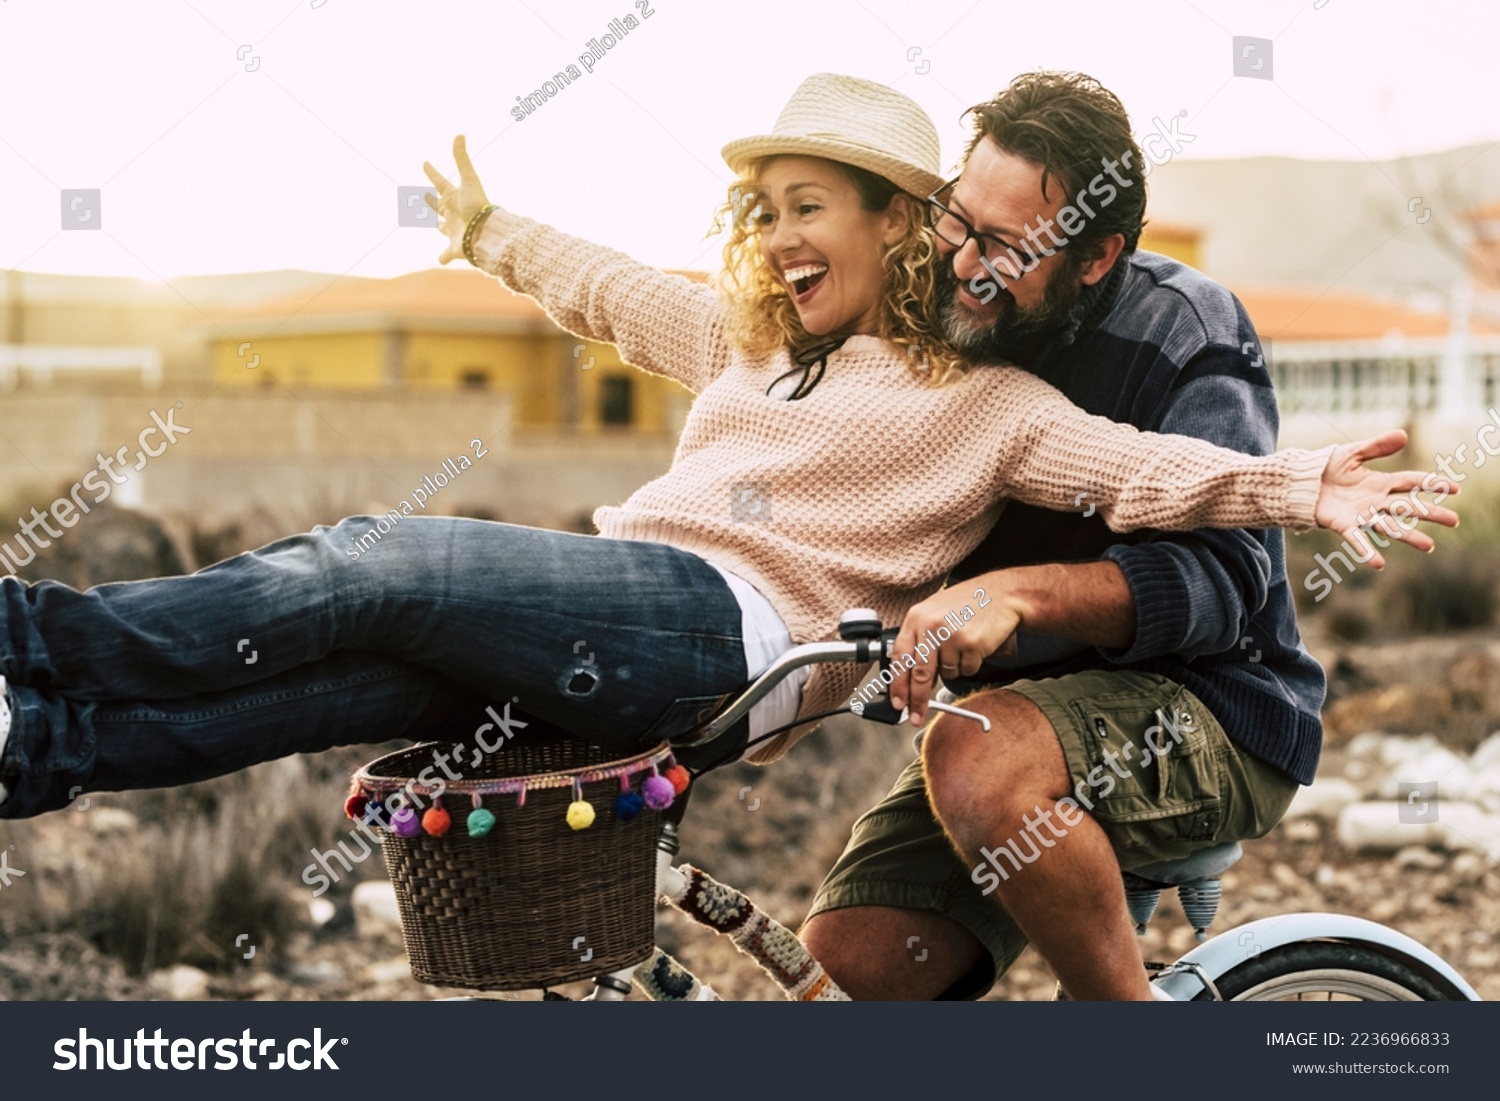 Happy couple enjoy outdoor leisure activity together carrying and using a bike and laughing a lot. Love and friendship with mature man and woman in youthful lifestyle. Concept of joyful and excitement #2236966833